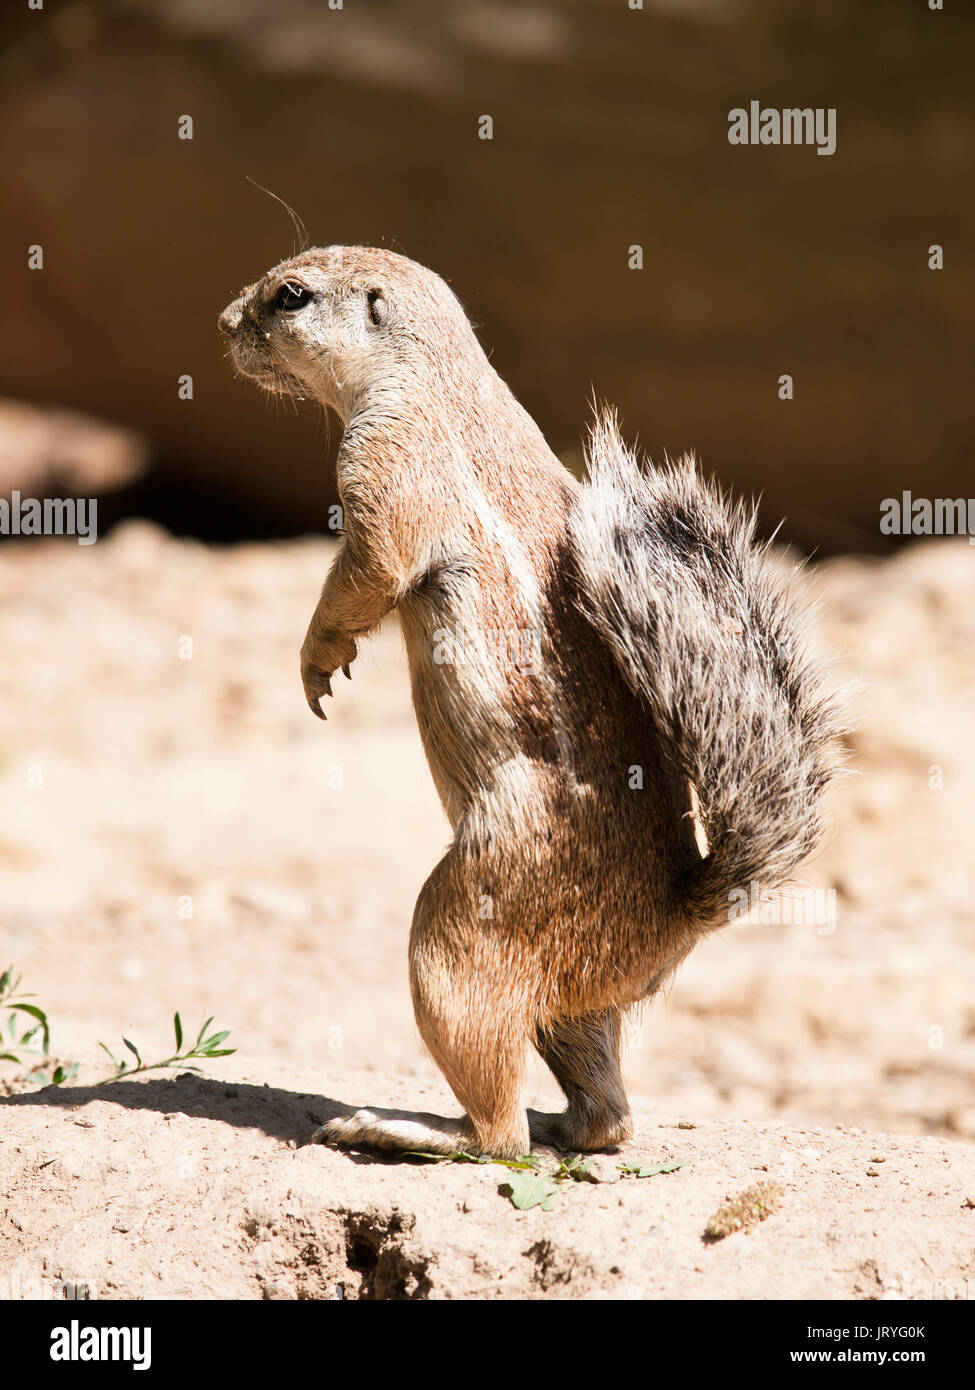 South African ground squirrel - Xerus inauris - staying on back leg watch around closely Stock Photo